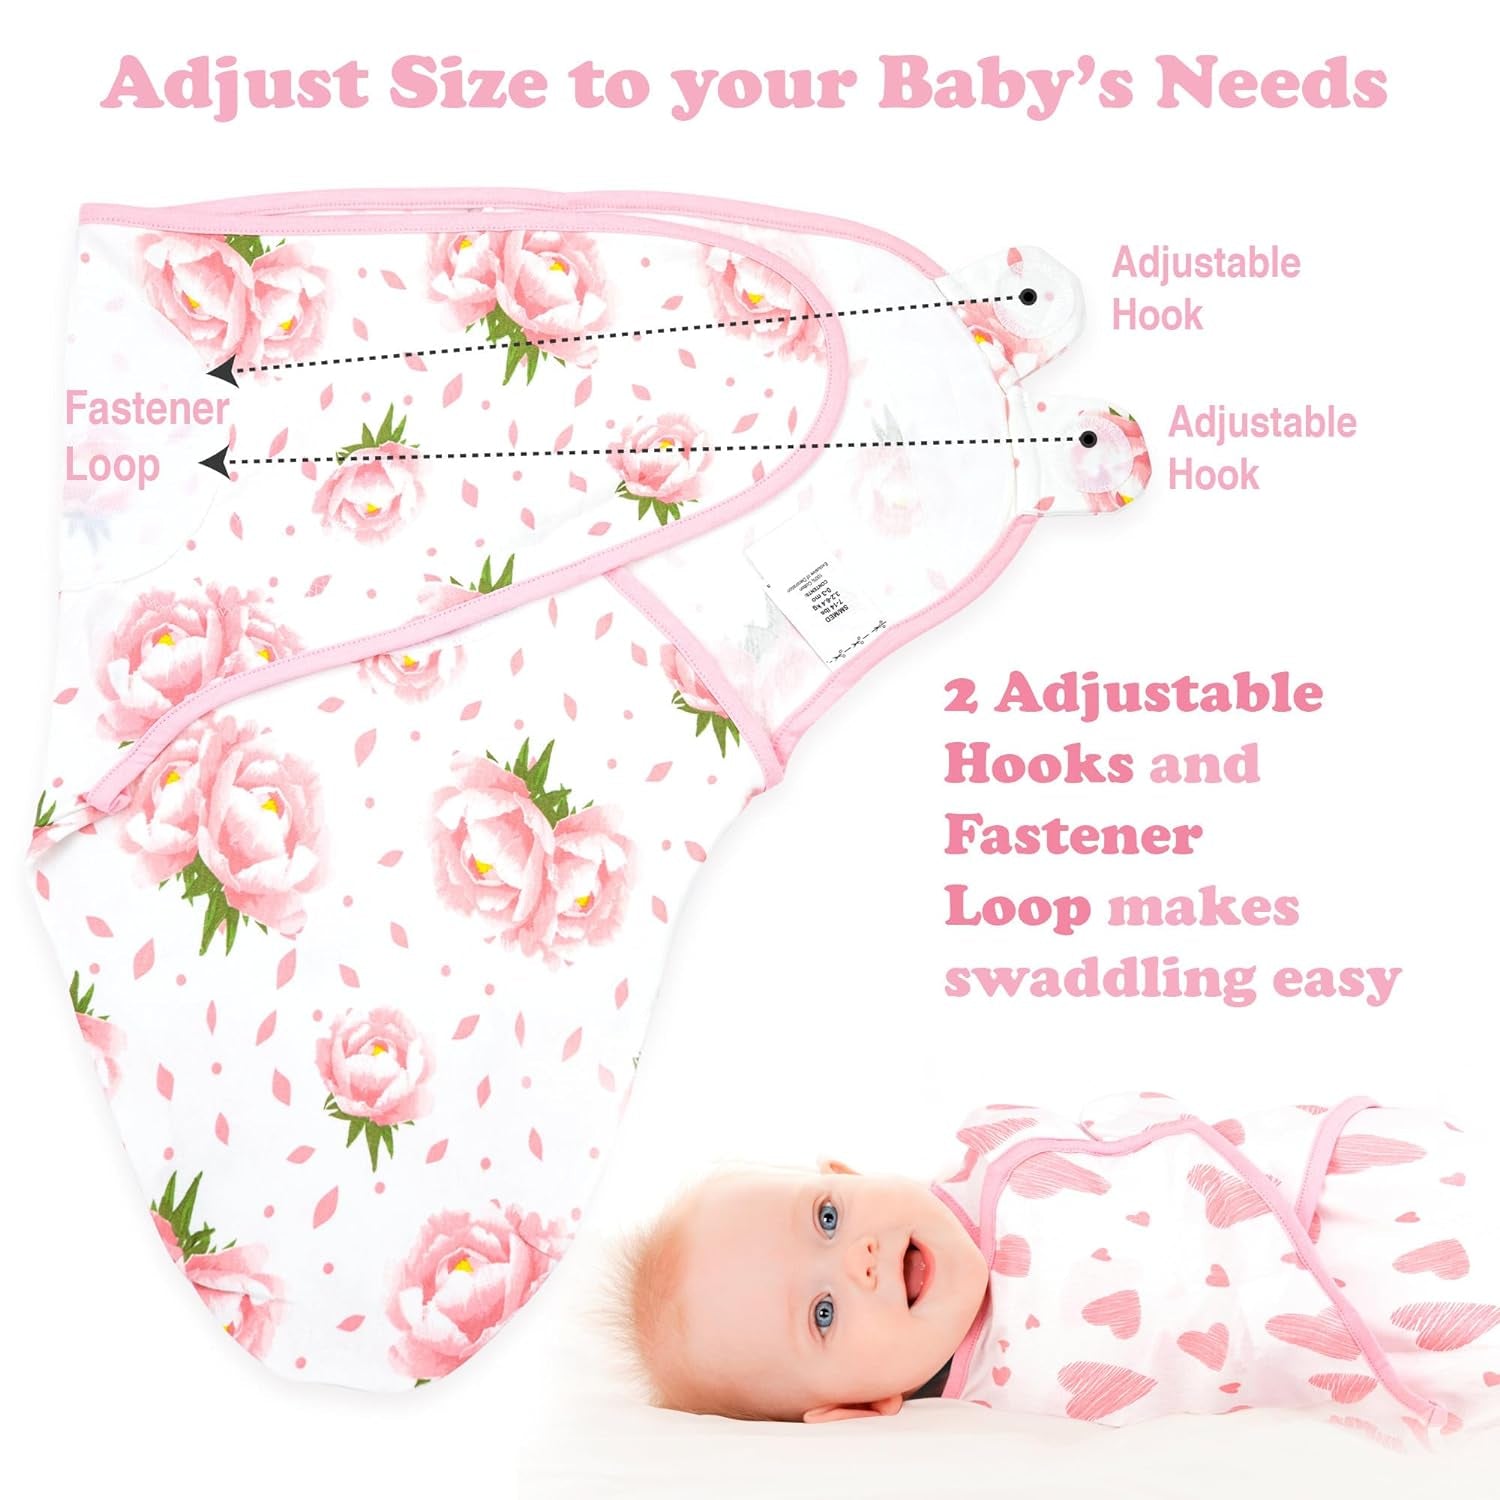 "Cozy and Stylish Baby Swaddle Blanket Wrap Set - Perfect for Newborns and Infants, 3-Pack with Adorable Pink Floral Design"